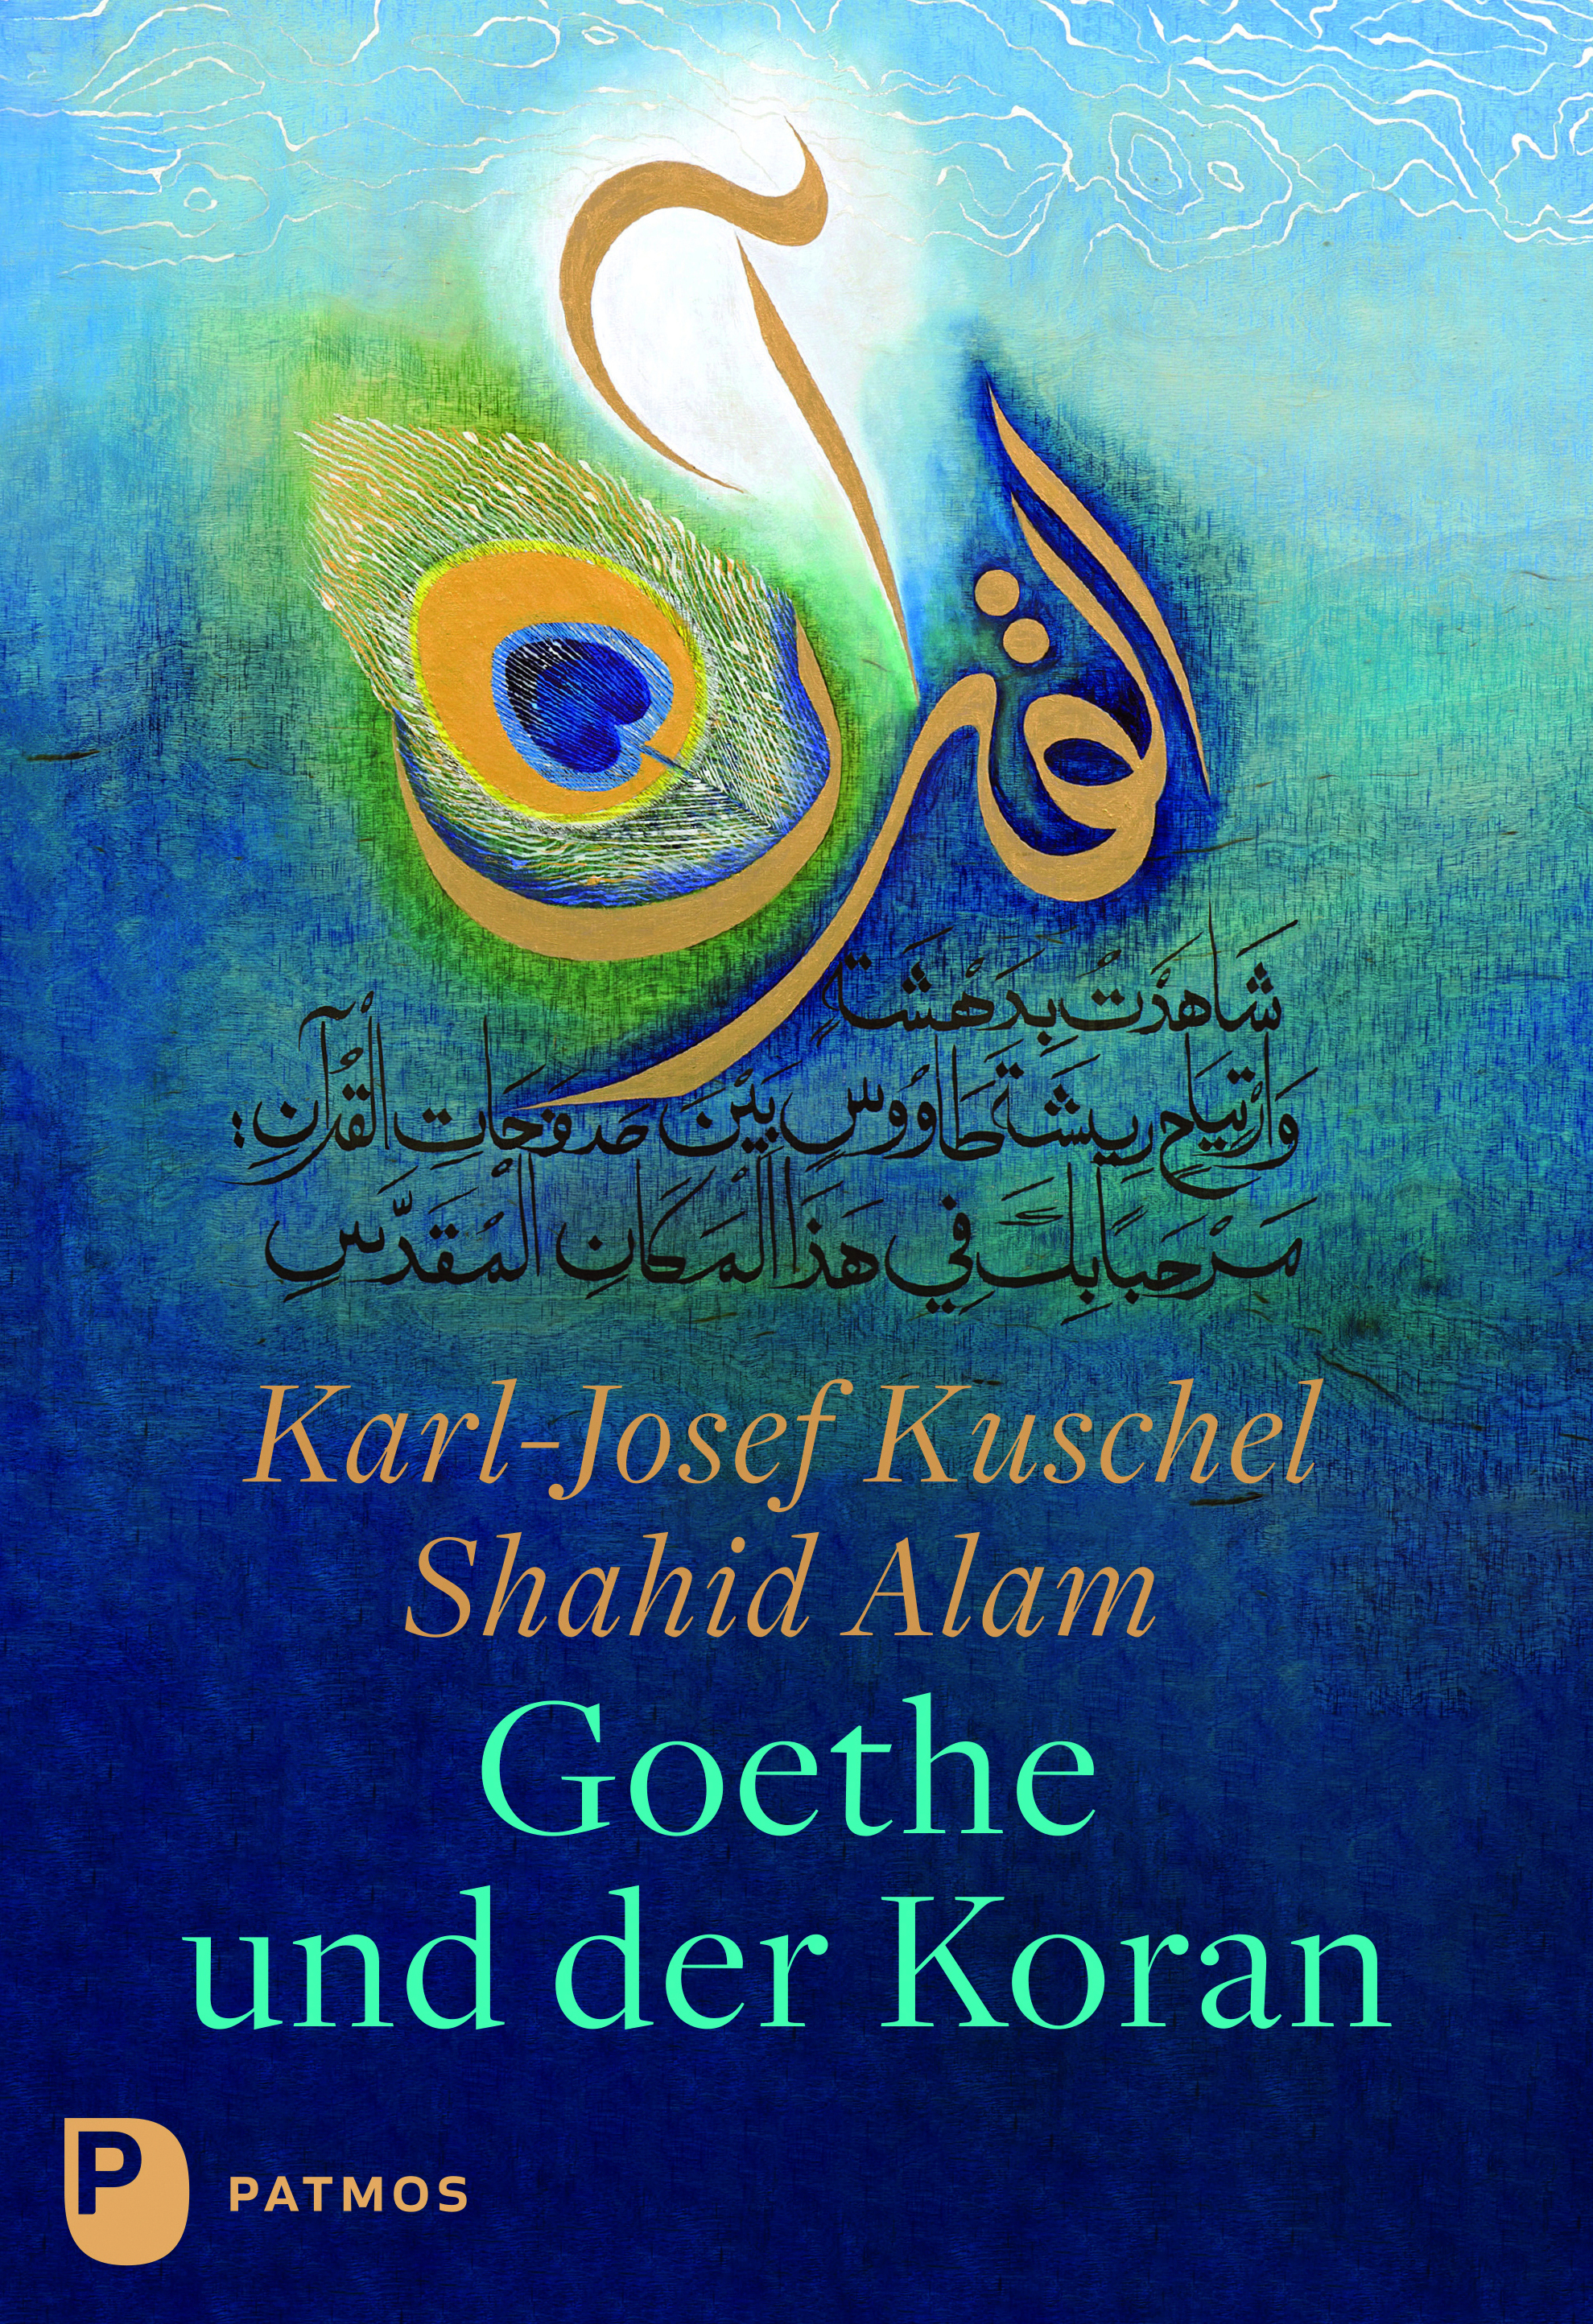 Cover of "Goethe and the Koran" by Karl-Josef Kuschel and Shahid Alam (published in German by Patmos Verlag)